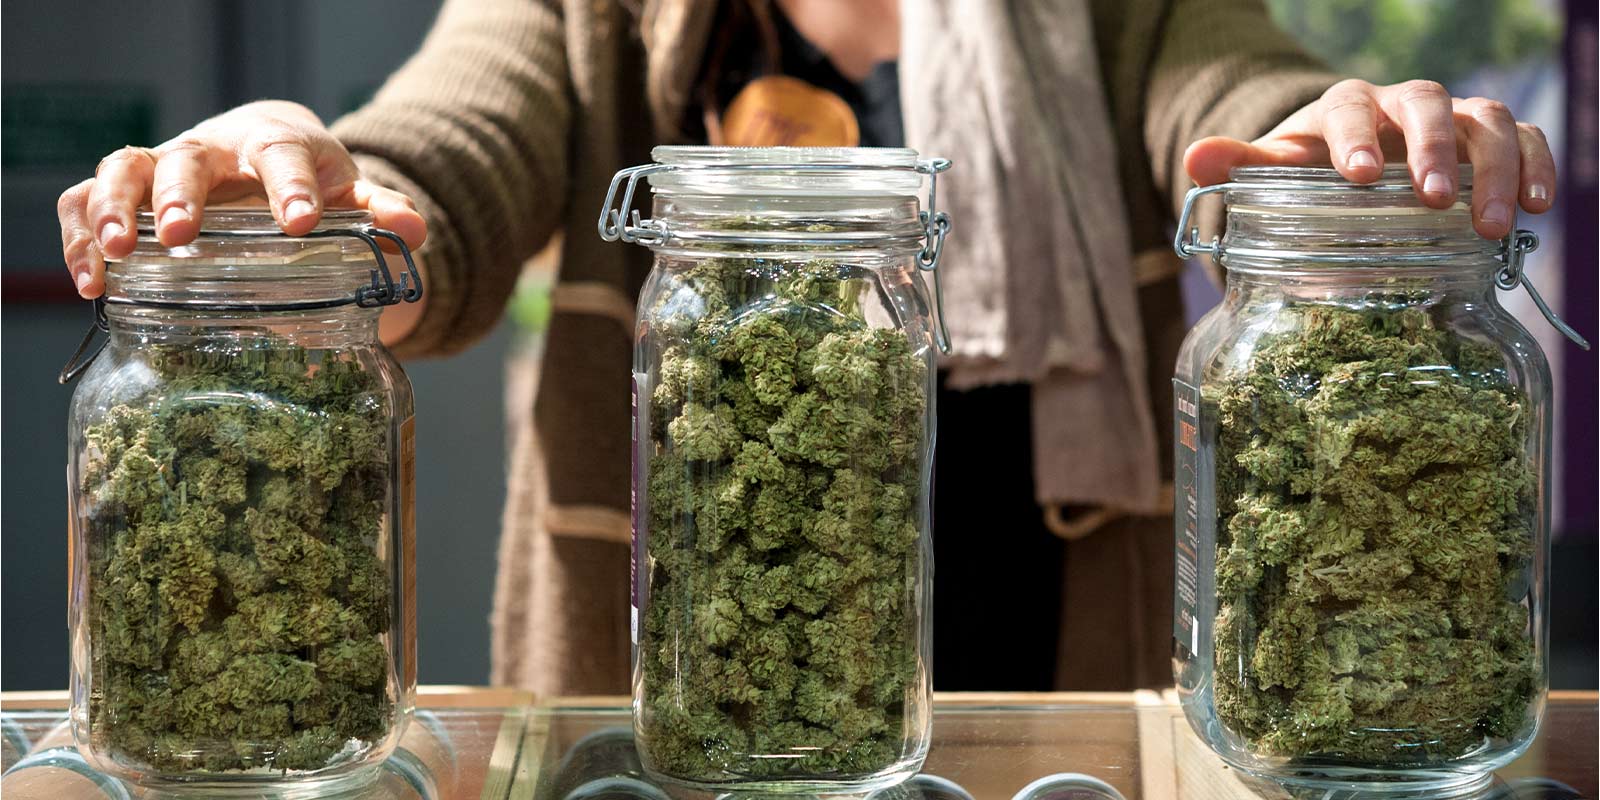 jars of different strains of weed that could make you sleepy